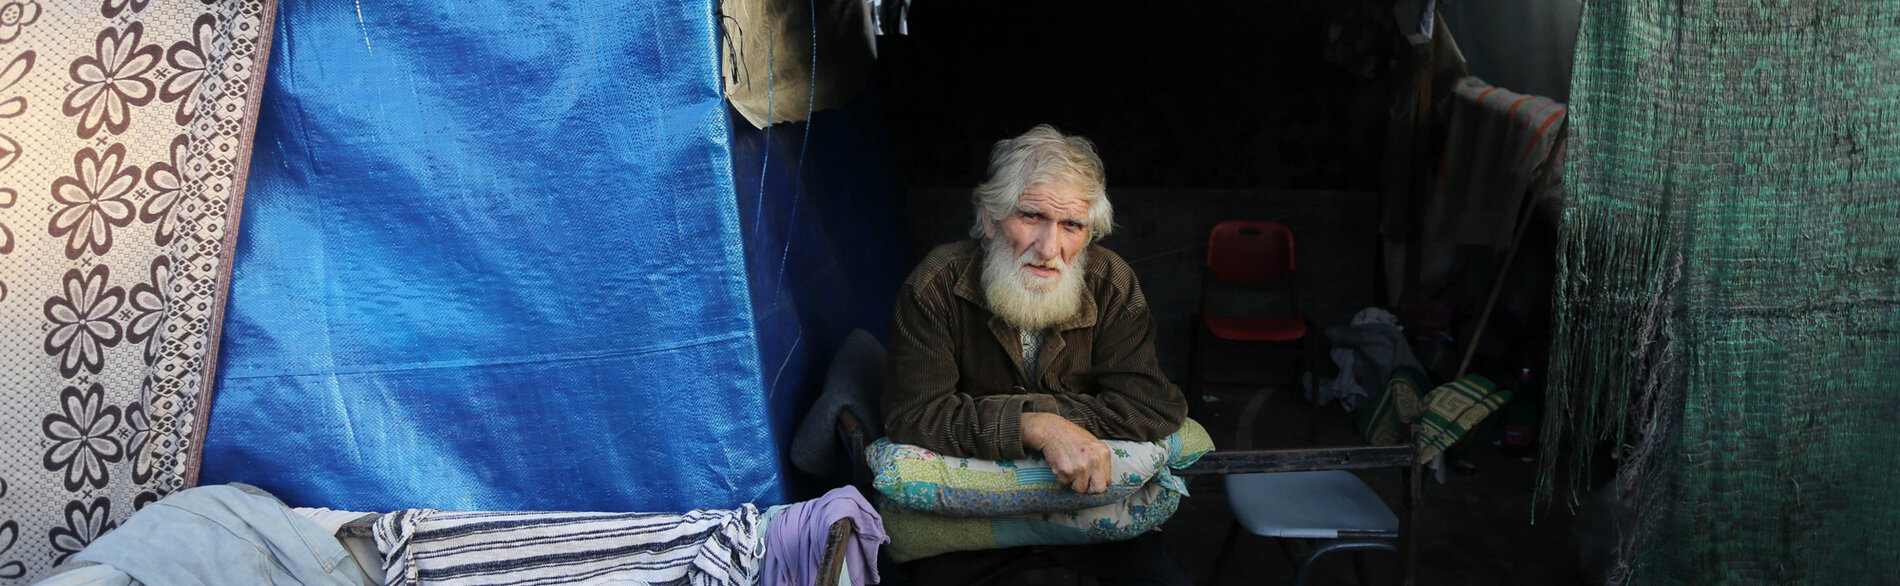 The approximately 111,500 older people in Gaza are among those most at risk of hunger, dehydration, illness, injury, and death, HelpAge reports. A displaced older Palestinian in a makeshift shelter. Photo by UNRWA